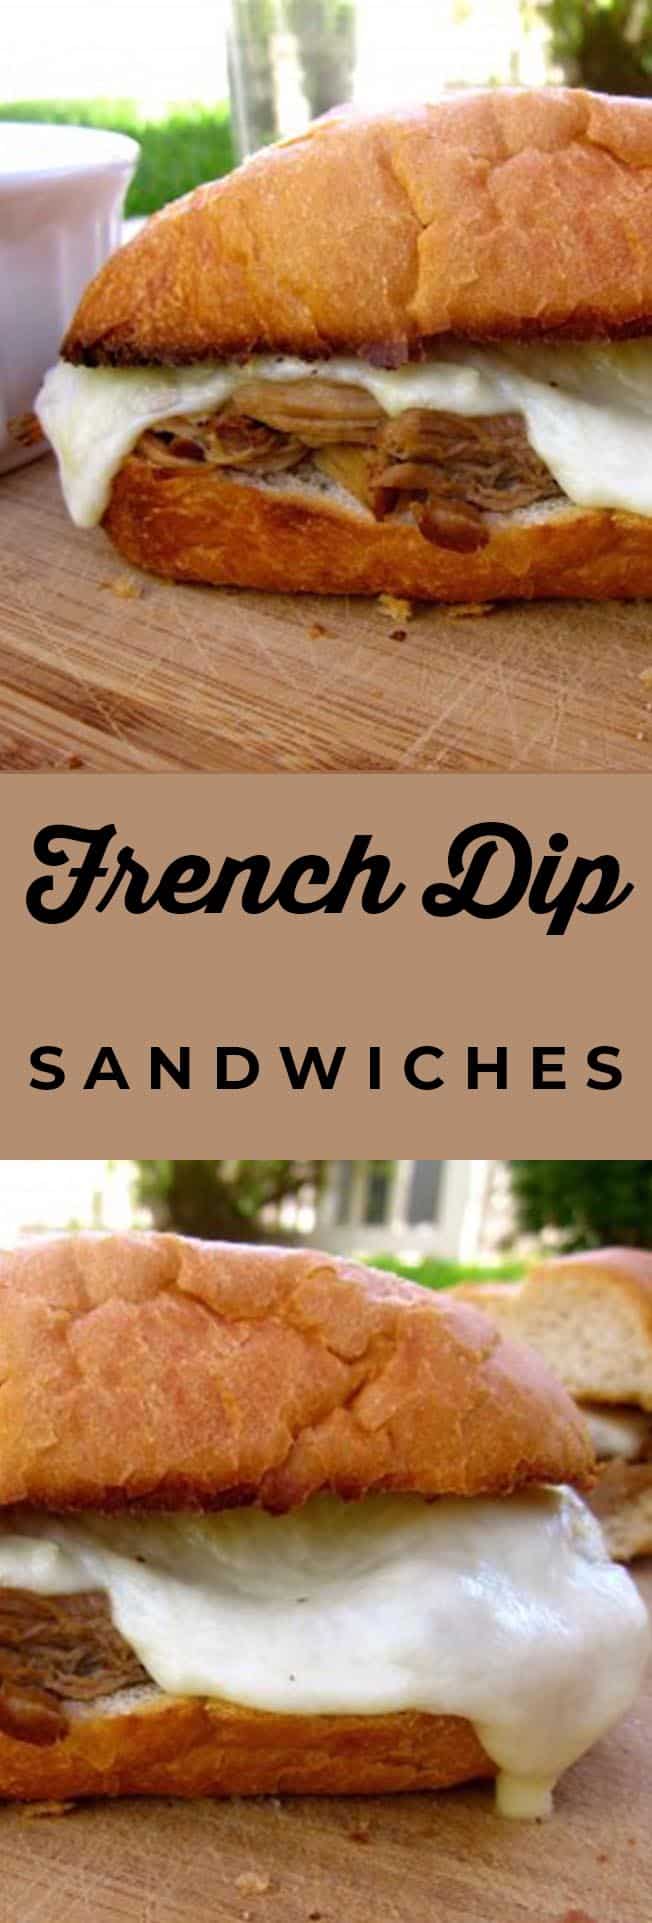 French dip sandwiches recipe